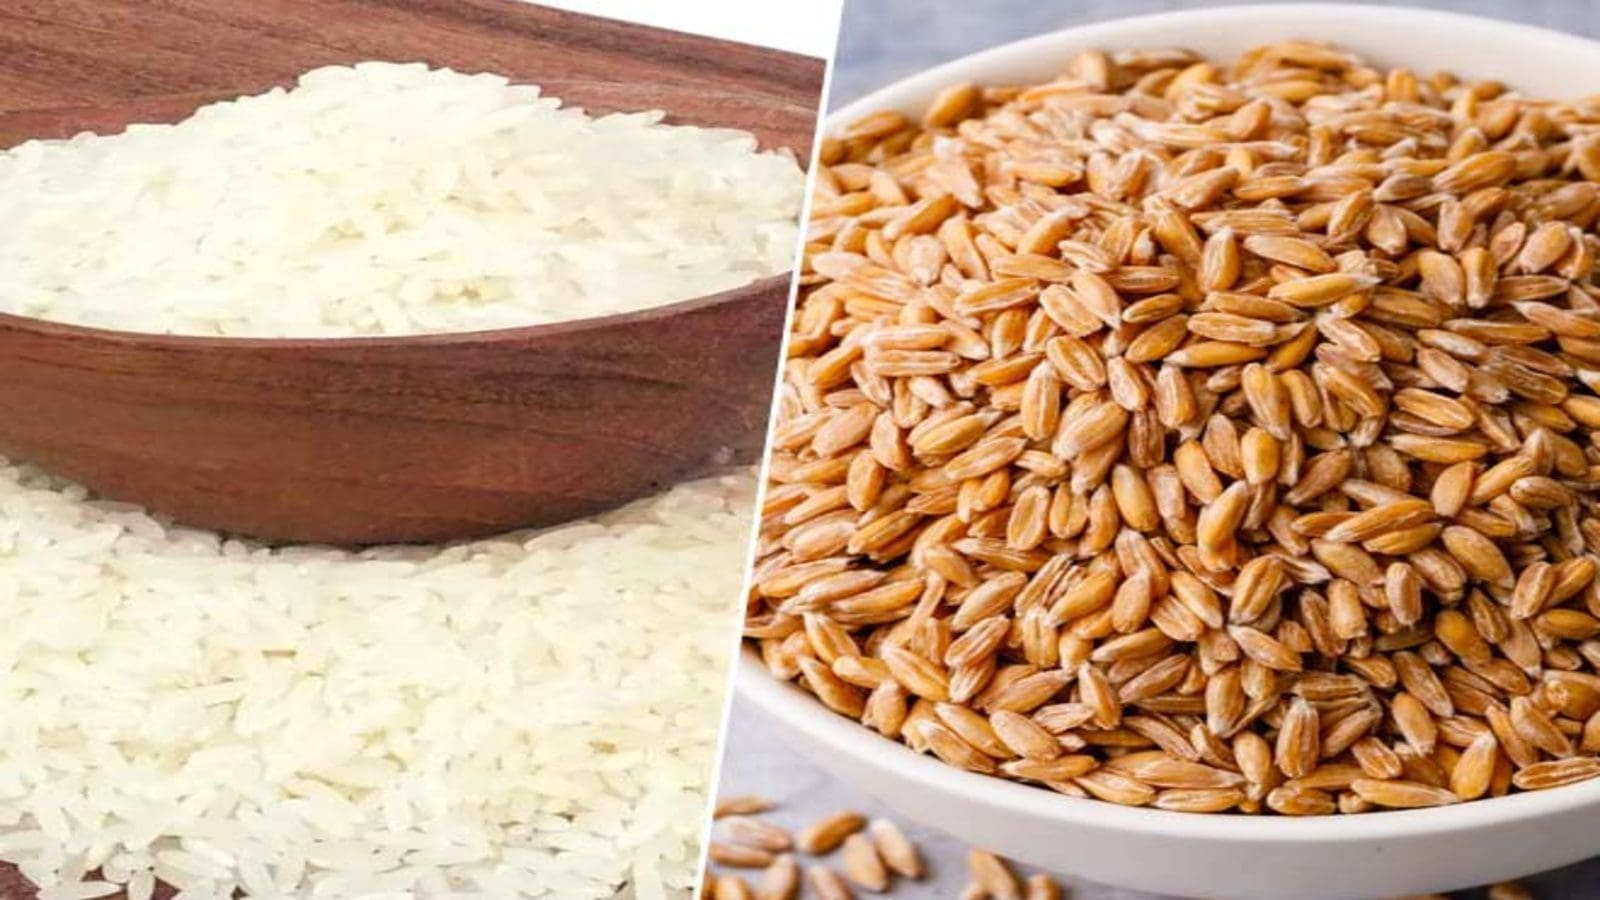 Egypt intends to purchase 5M tonnes of wheat, short grain rice in international tender in 2024